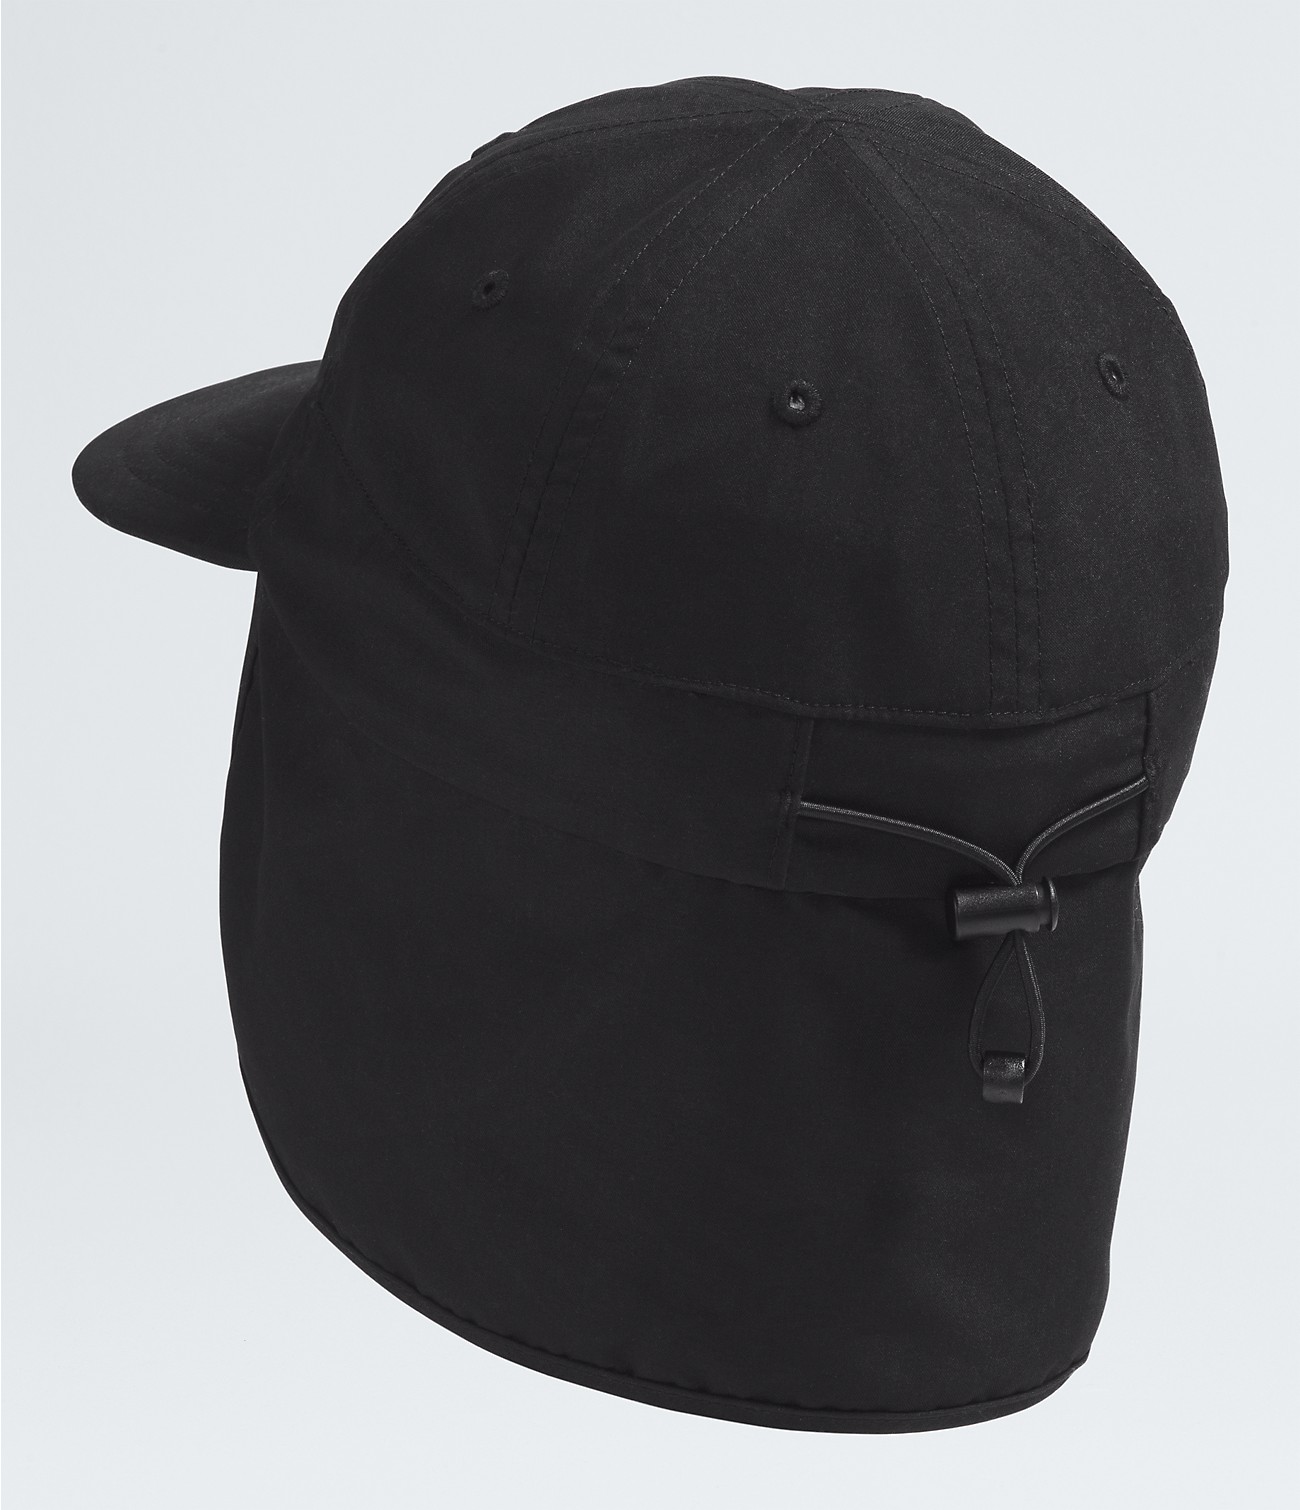 Kids’ Class V Sunshield Hat | The North Face